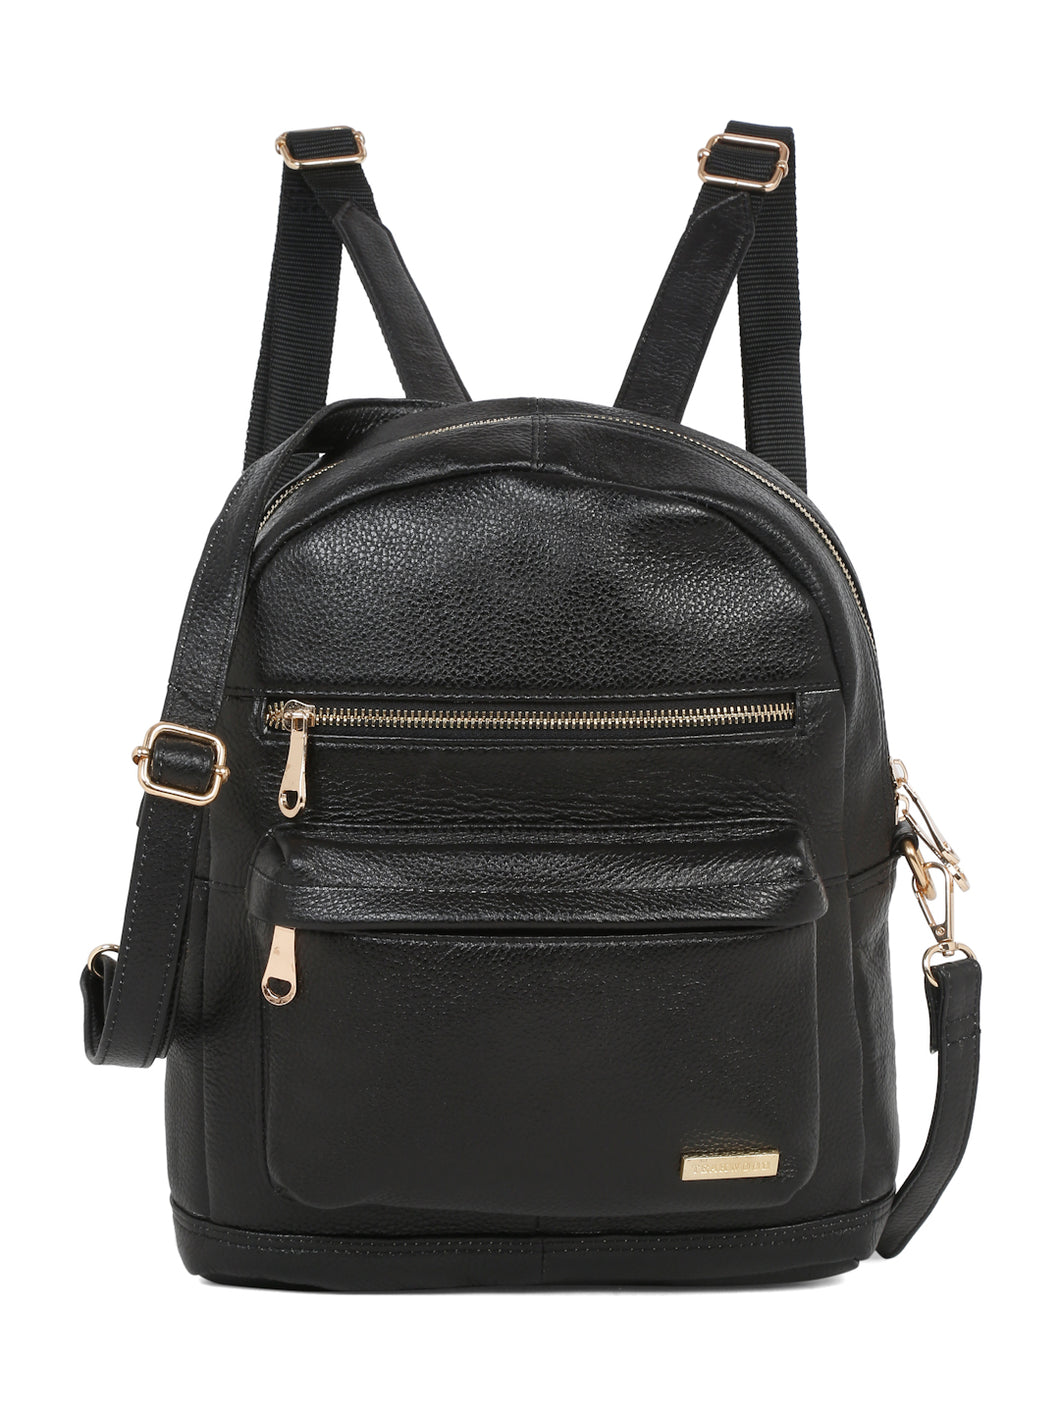 Women Black Texture Leather Backpack